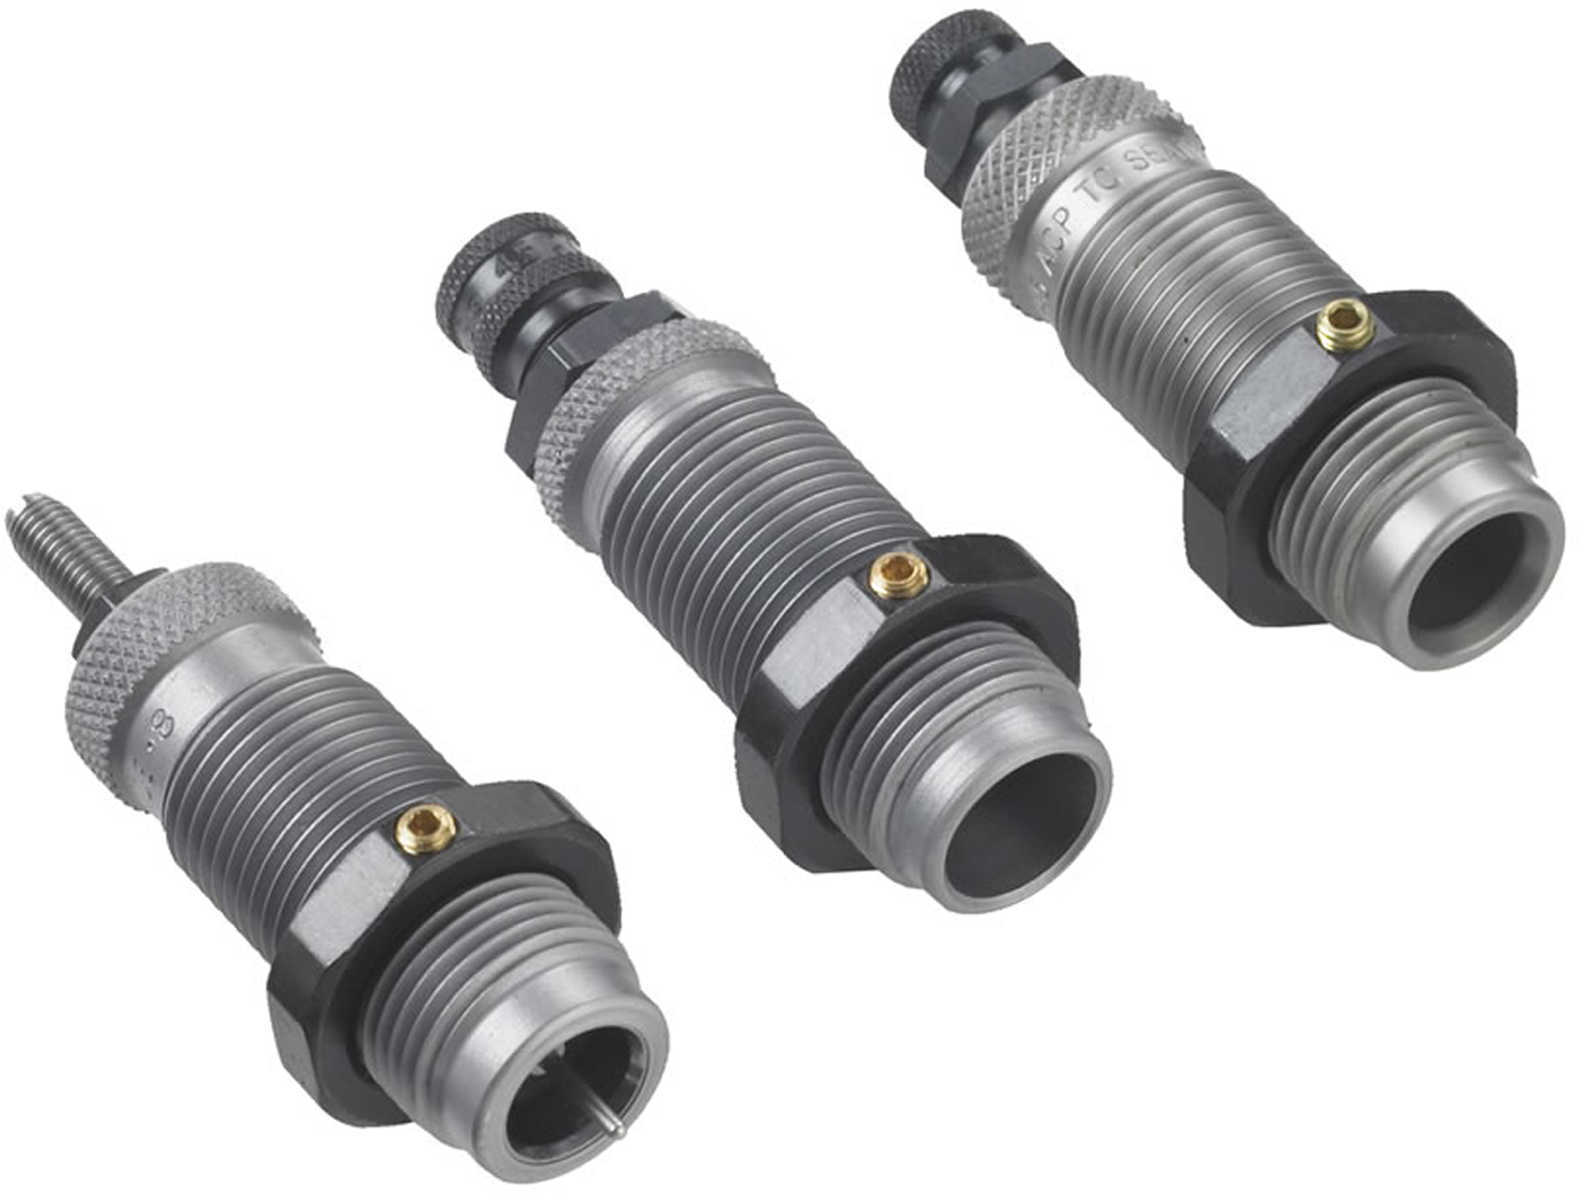 RCBS Carbide 3-Die Set For 357 Mag/38 Special Md: 18212